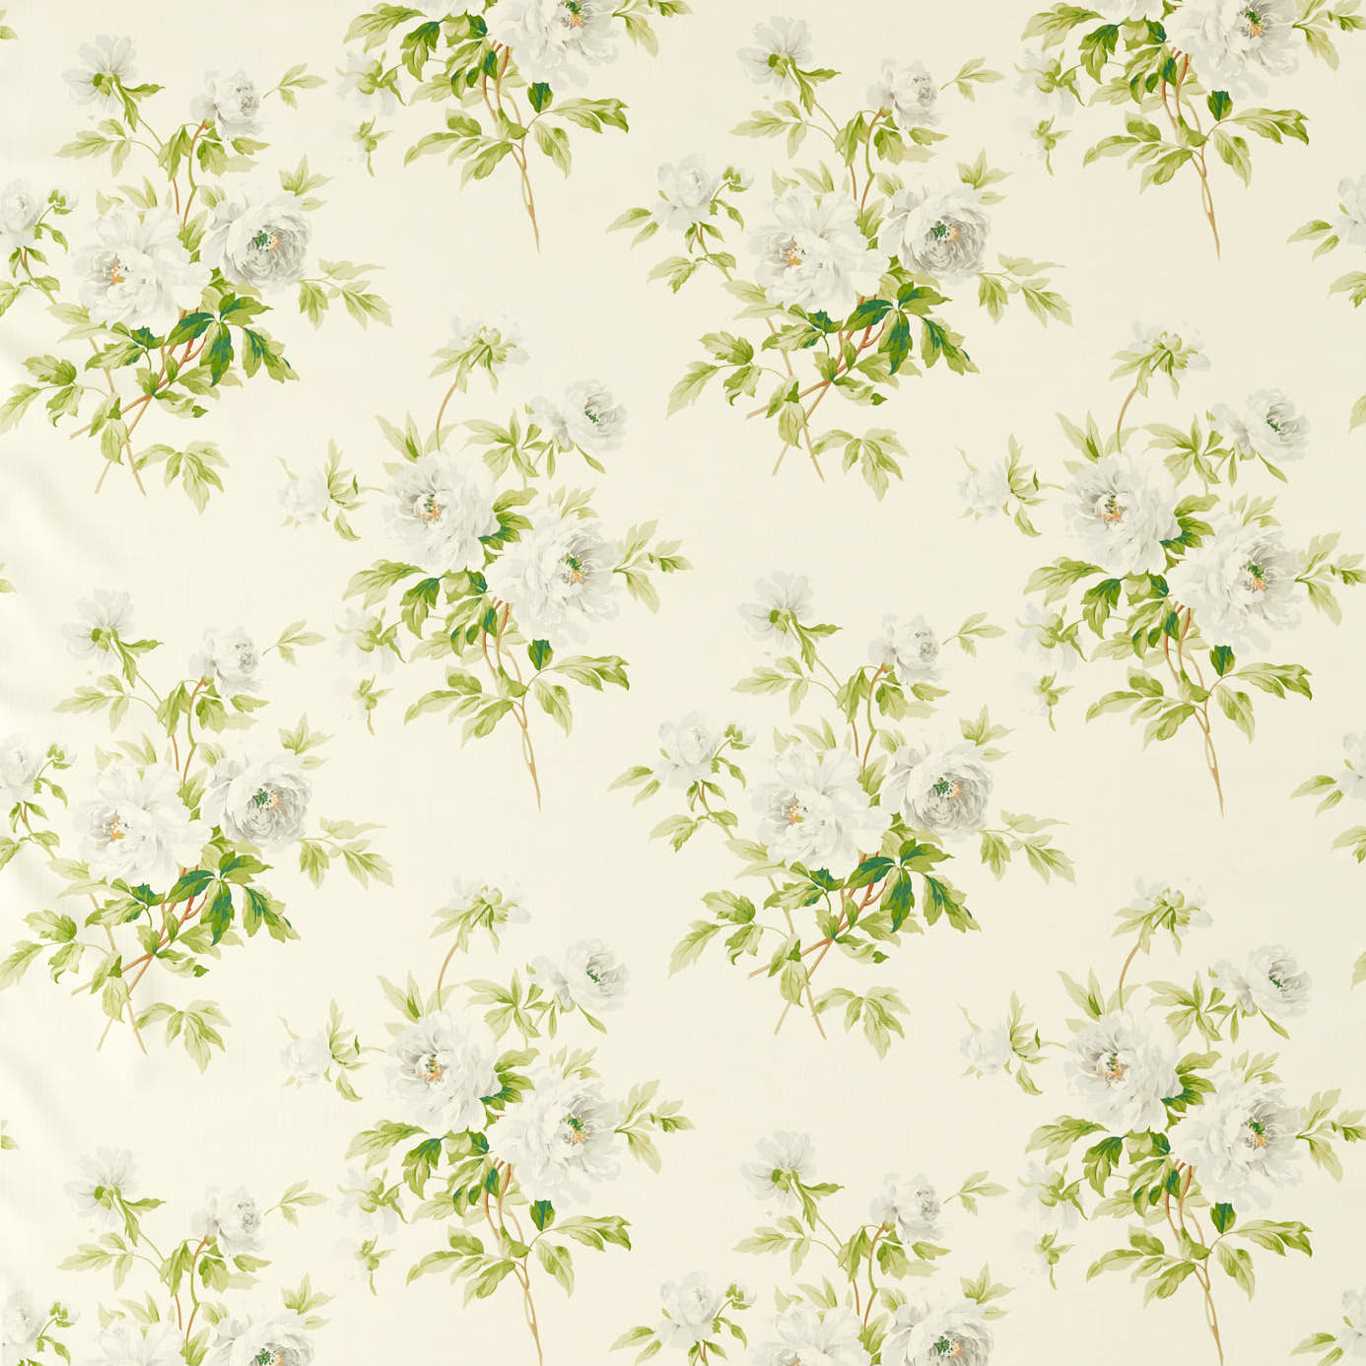 Adele Fabric by Sanderson - DOSF226877 - English Pear